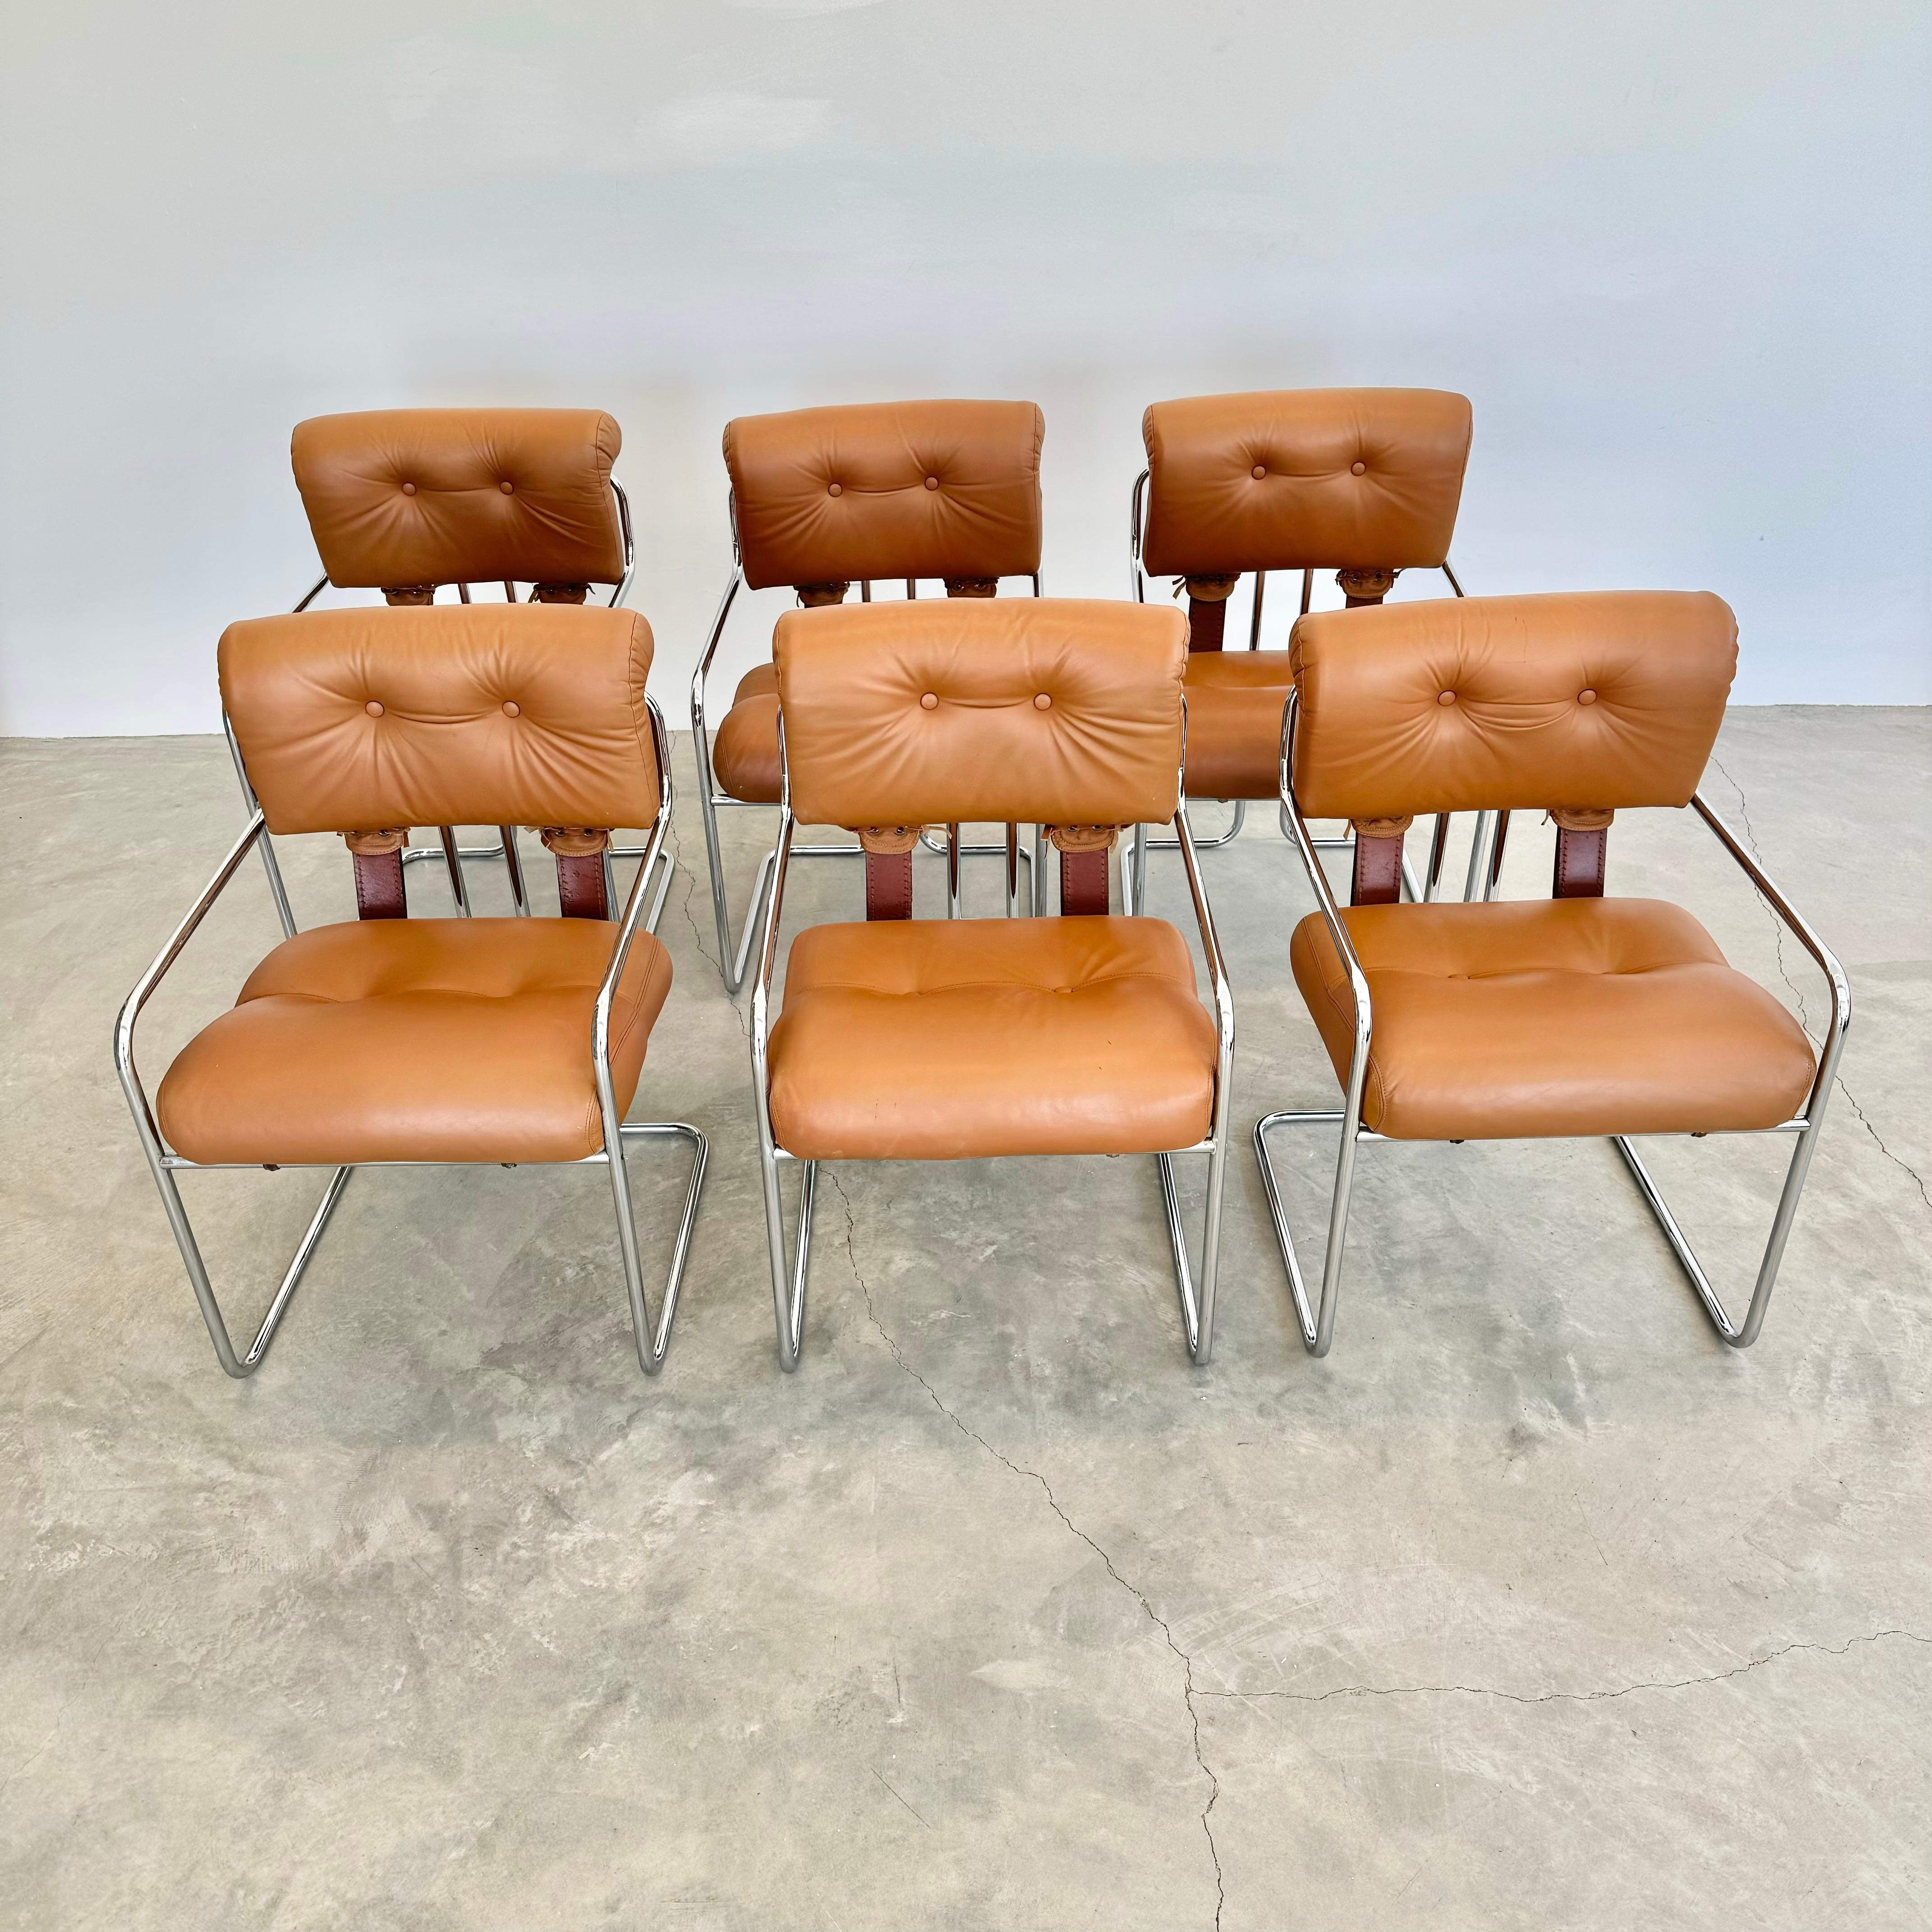 Mid-Century Modern Set of 6 'Tucroma' Chairs in Tan by Guido Faleschini, 1970s Italy For Sale